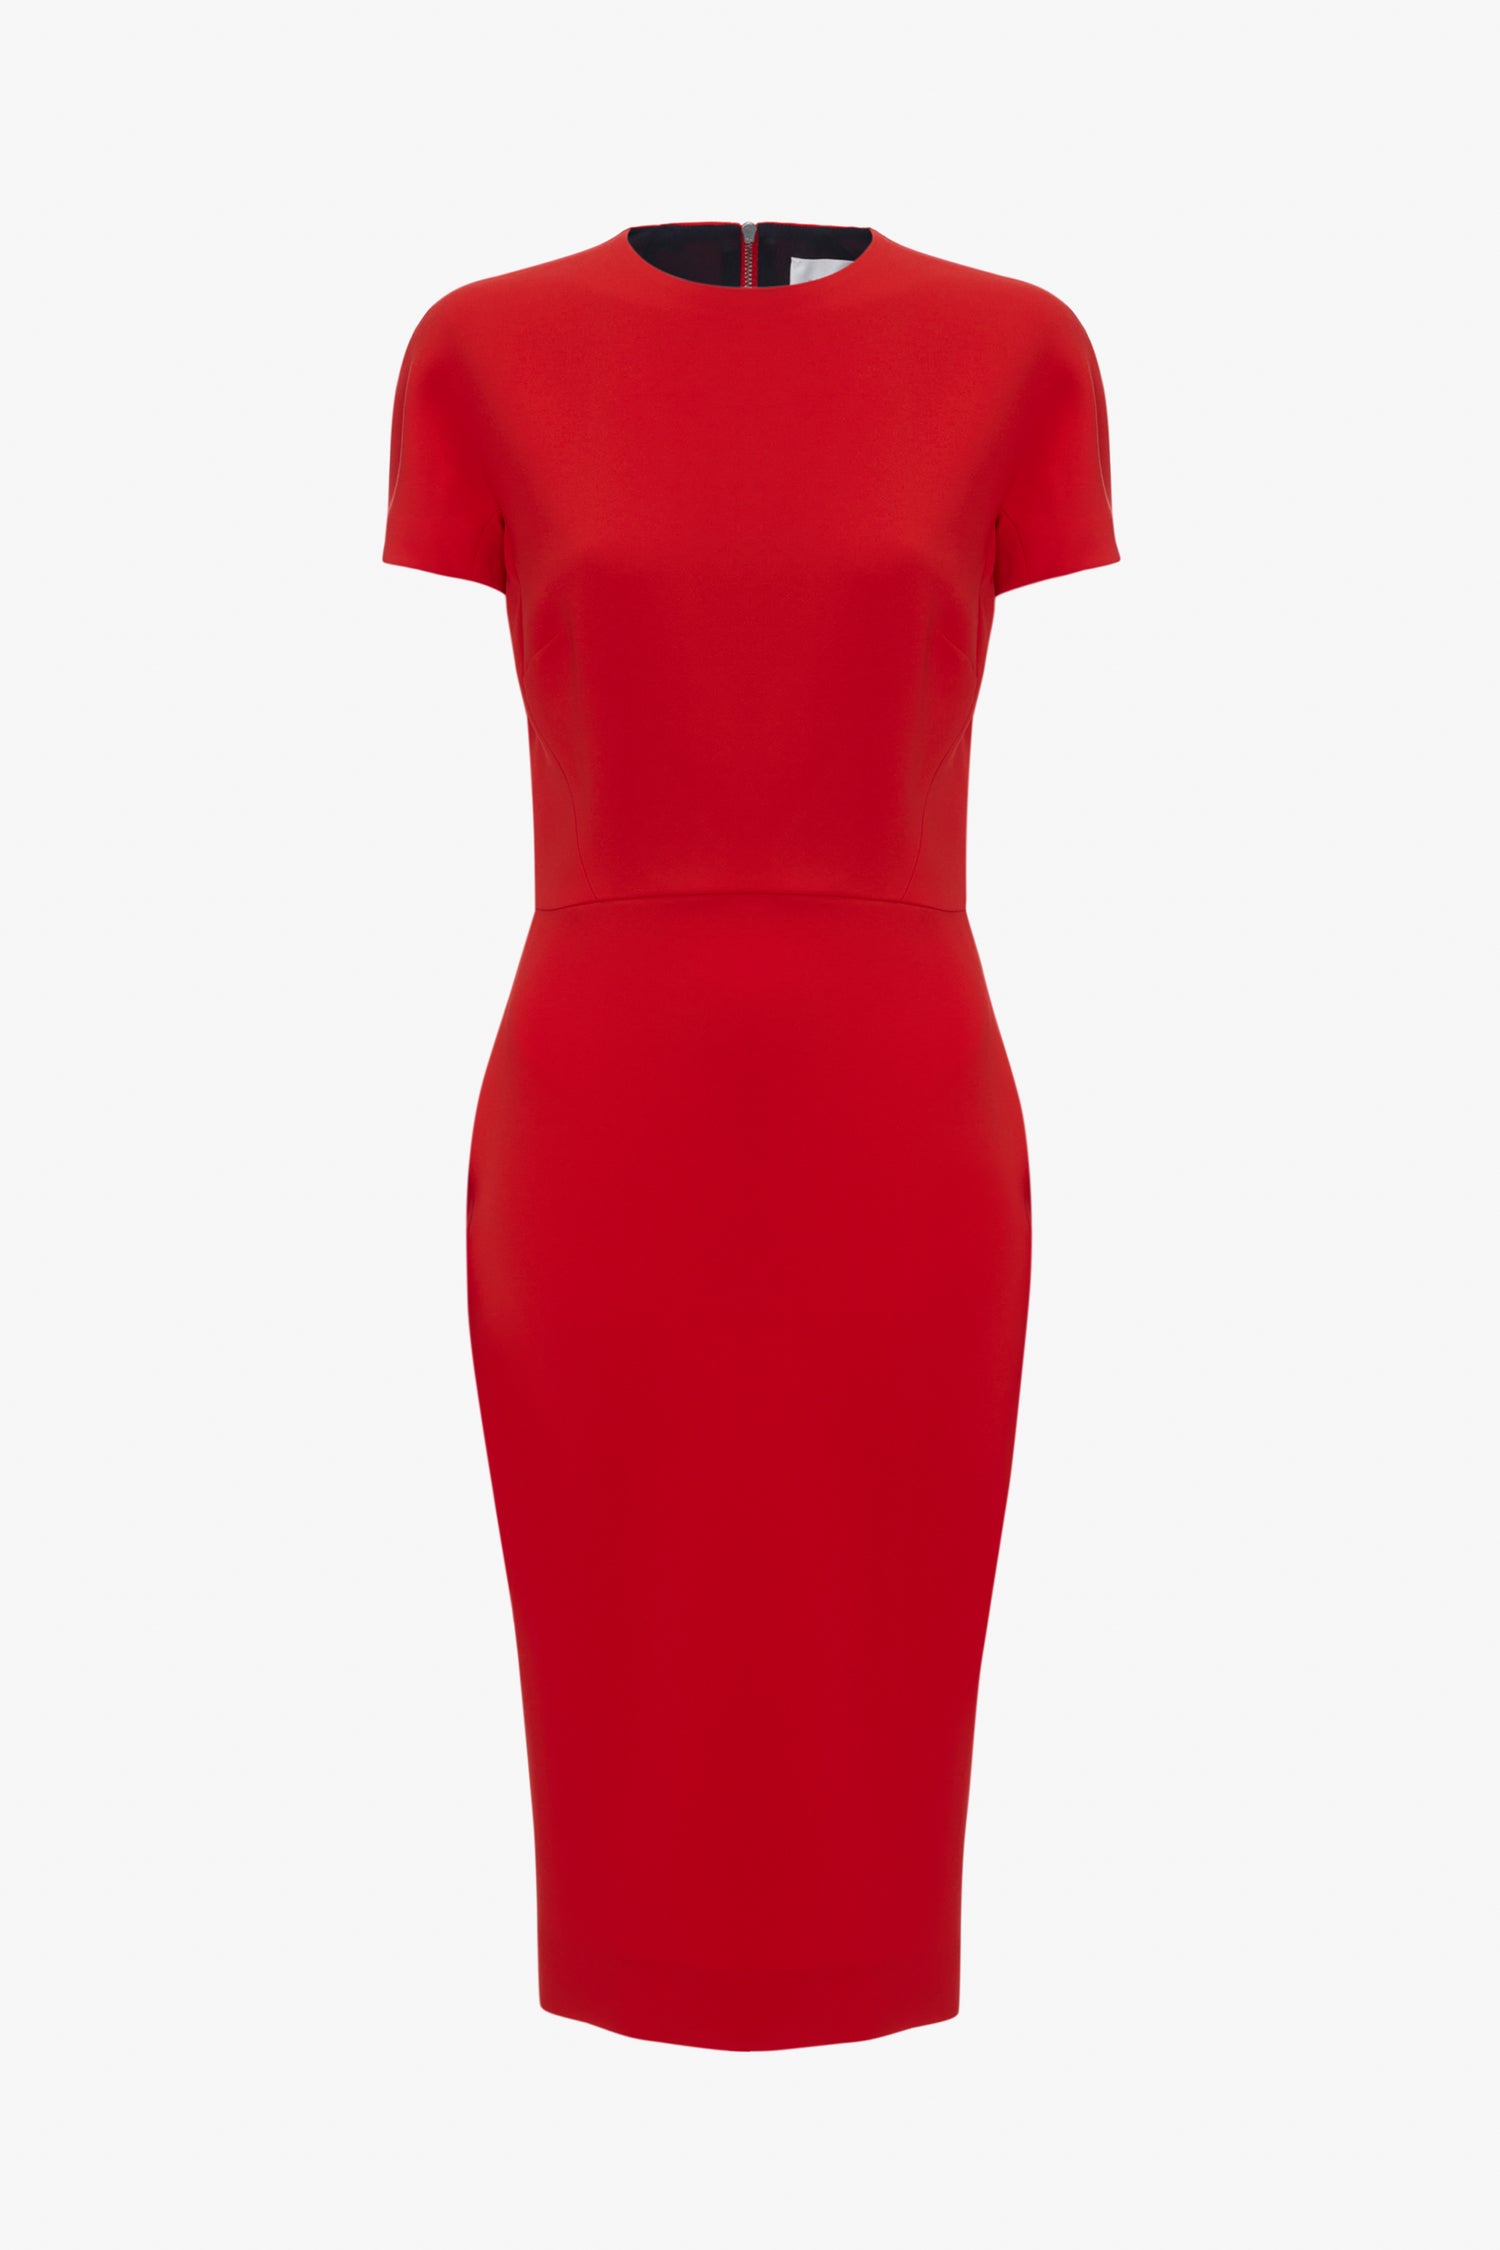 A Victoria Beckham bright red, knee-length fitted t-shirt dress featuring short sleeves and a round neckline, isolated on a white background.